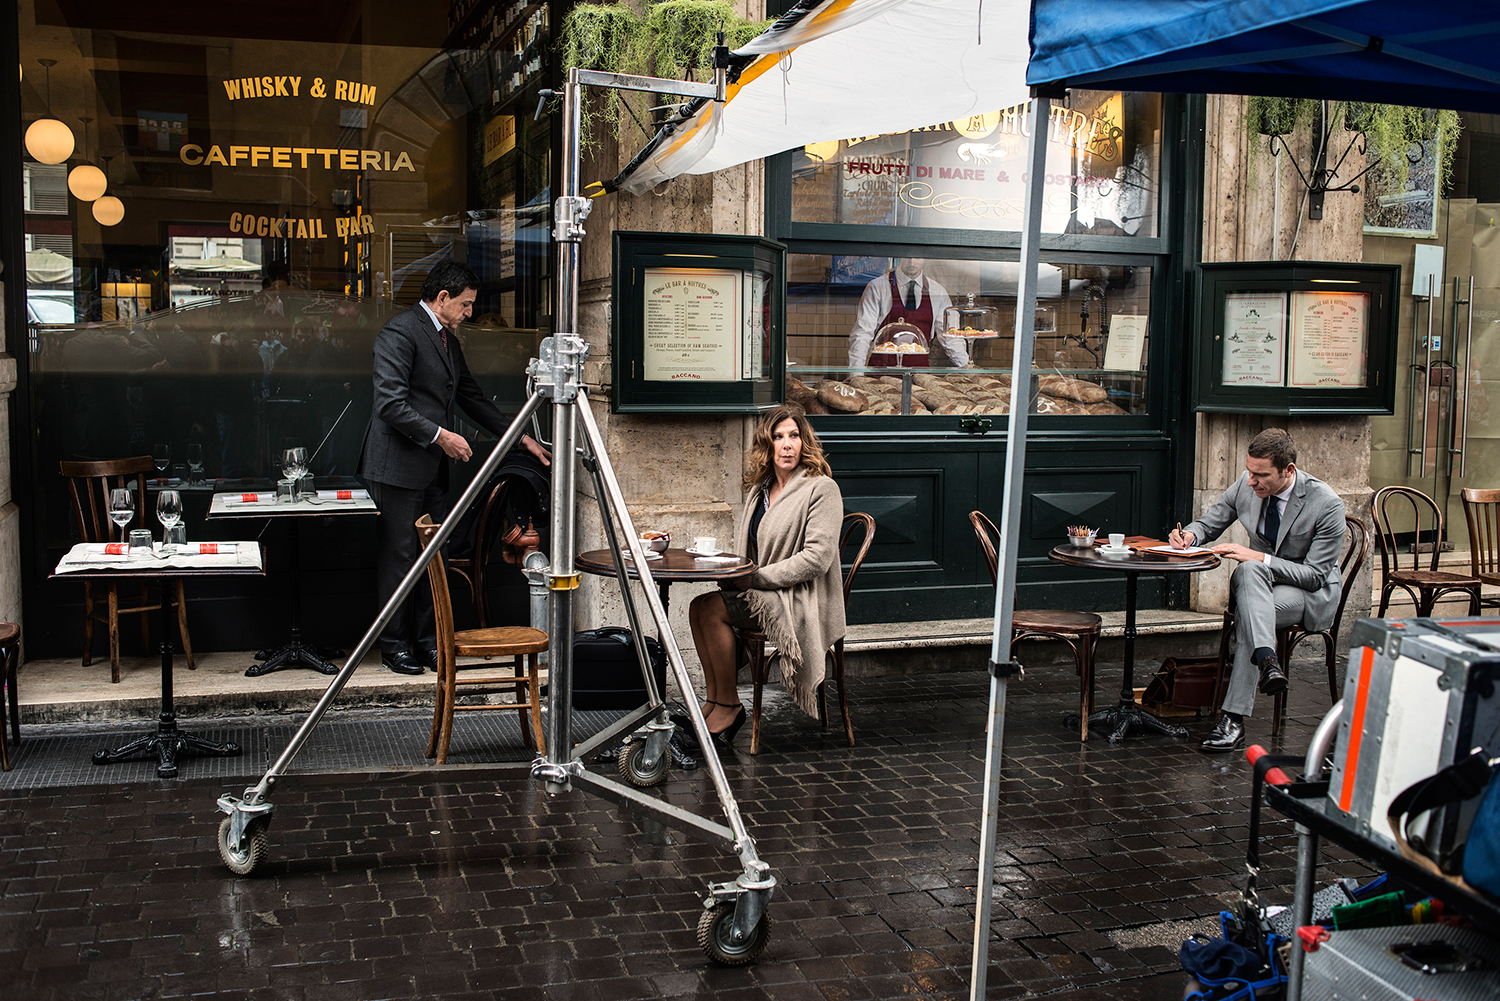 Shooting a movie in front of the Restaurant Baccano, Rome, January 2015.